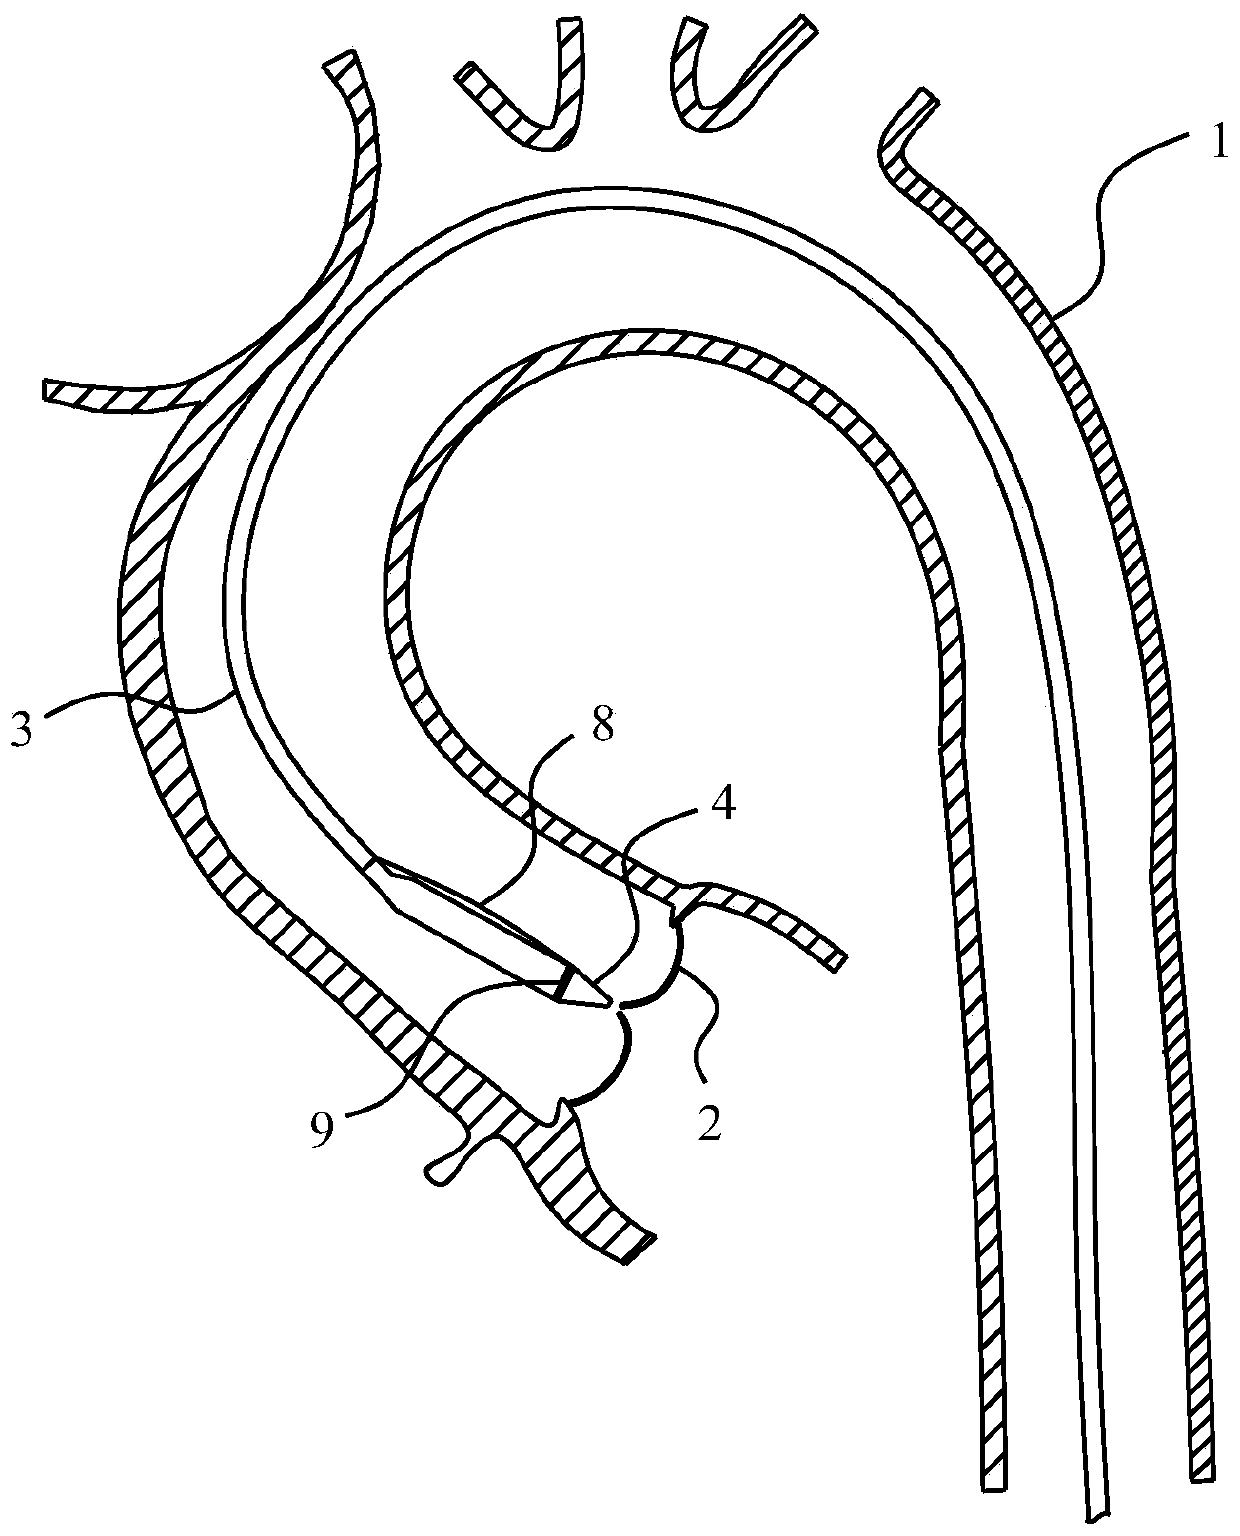 Bending-adjustable sheathed catheter and delivery system employing same